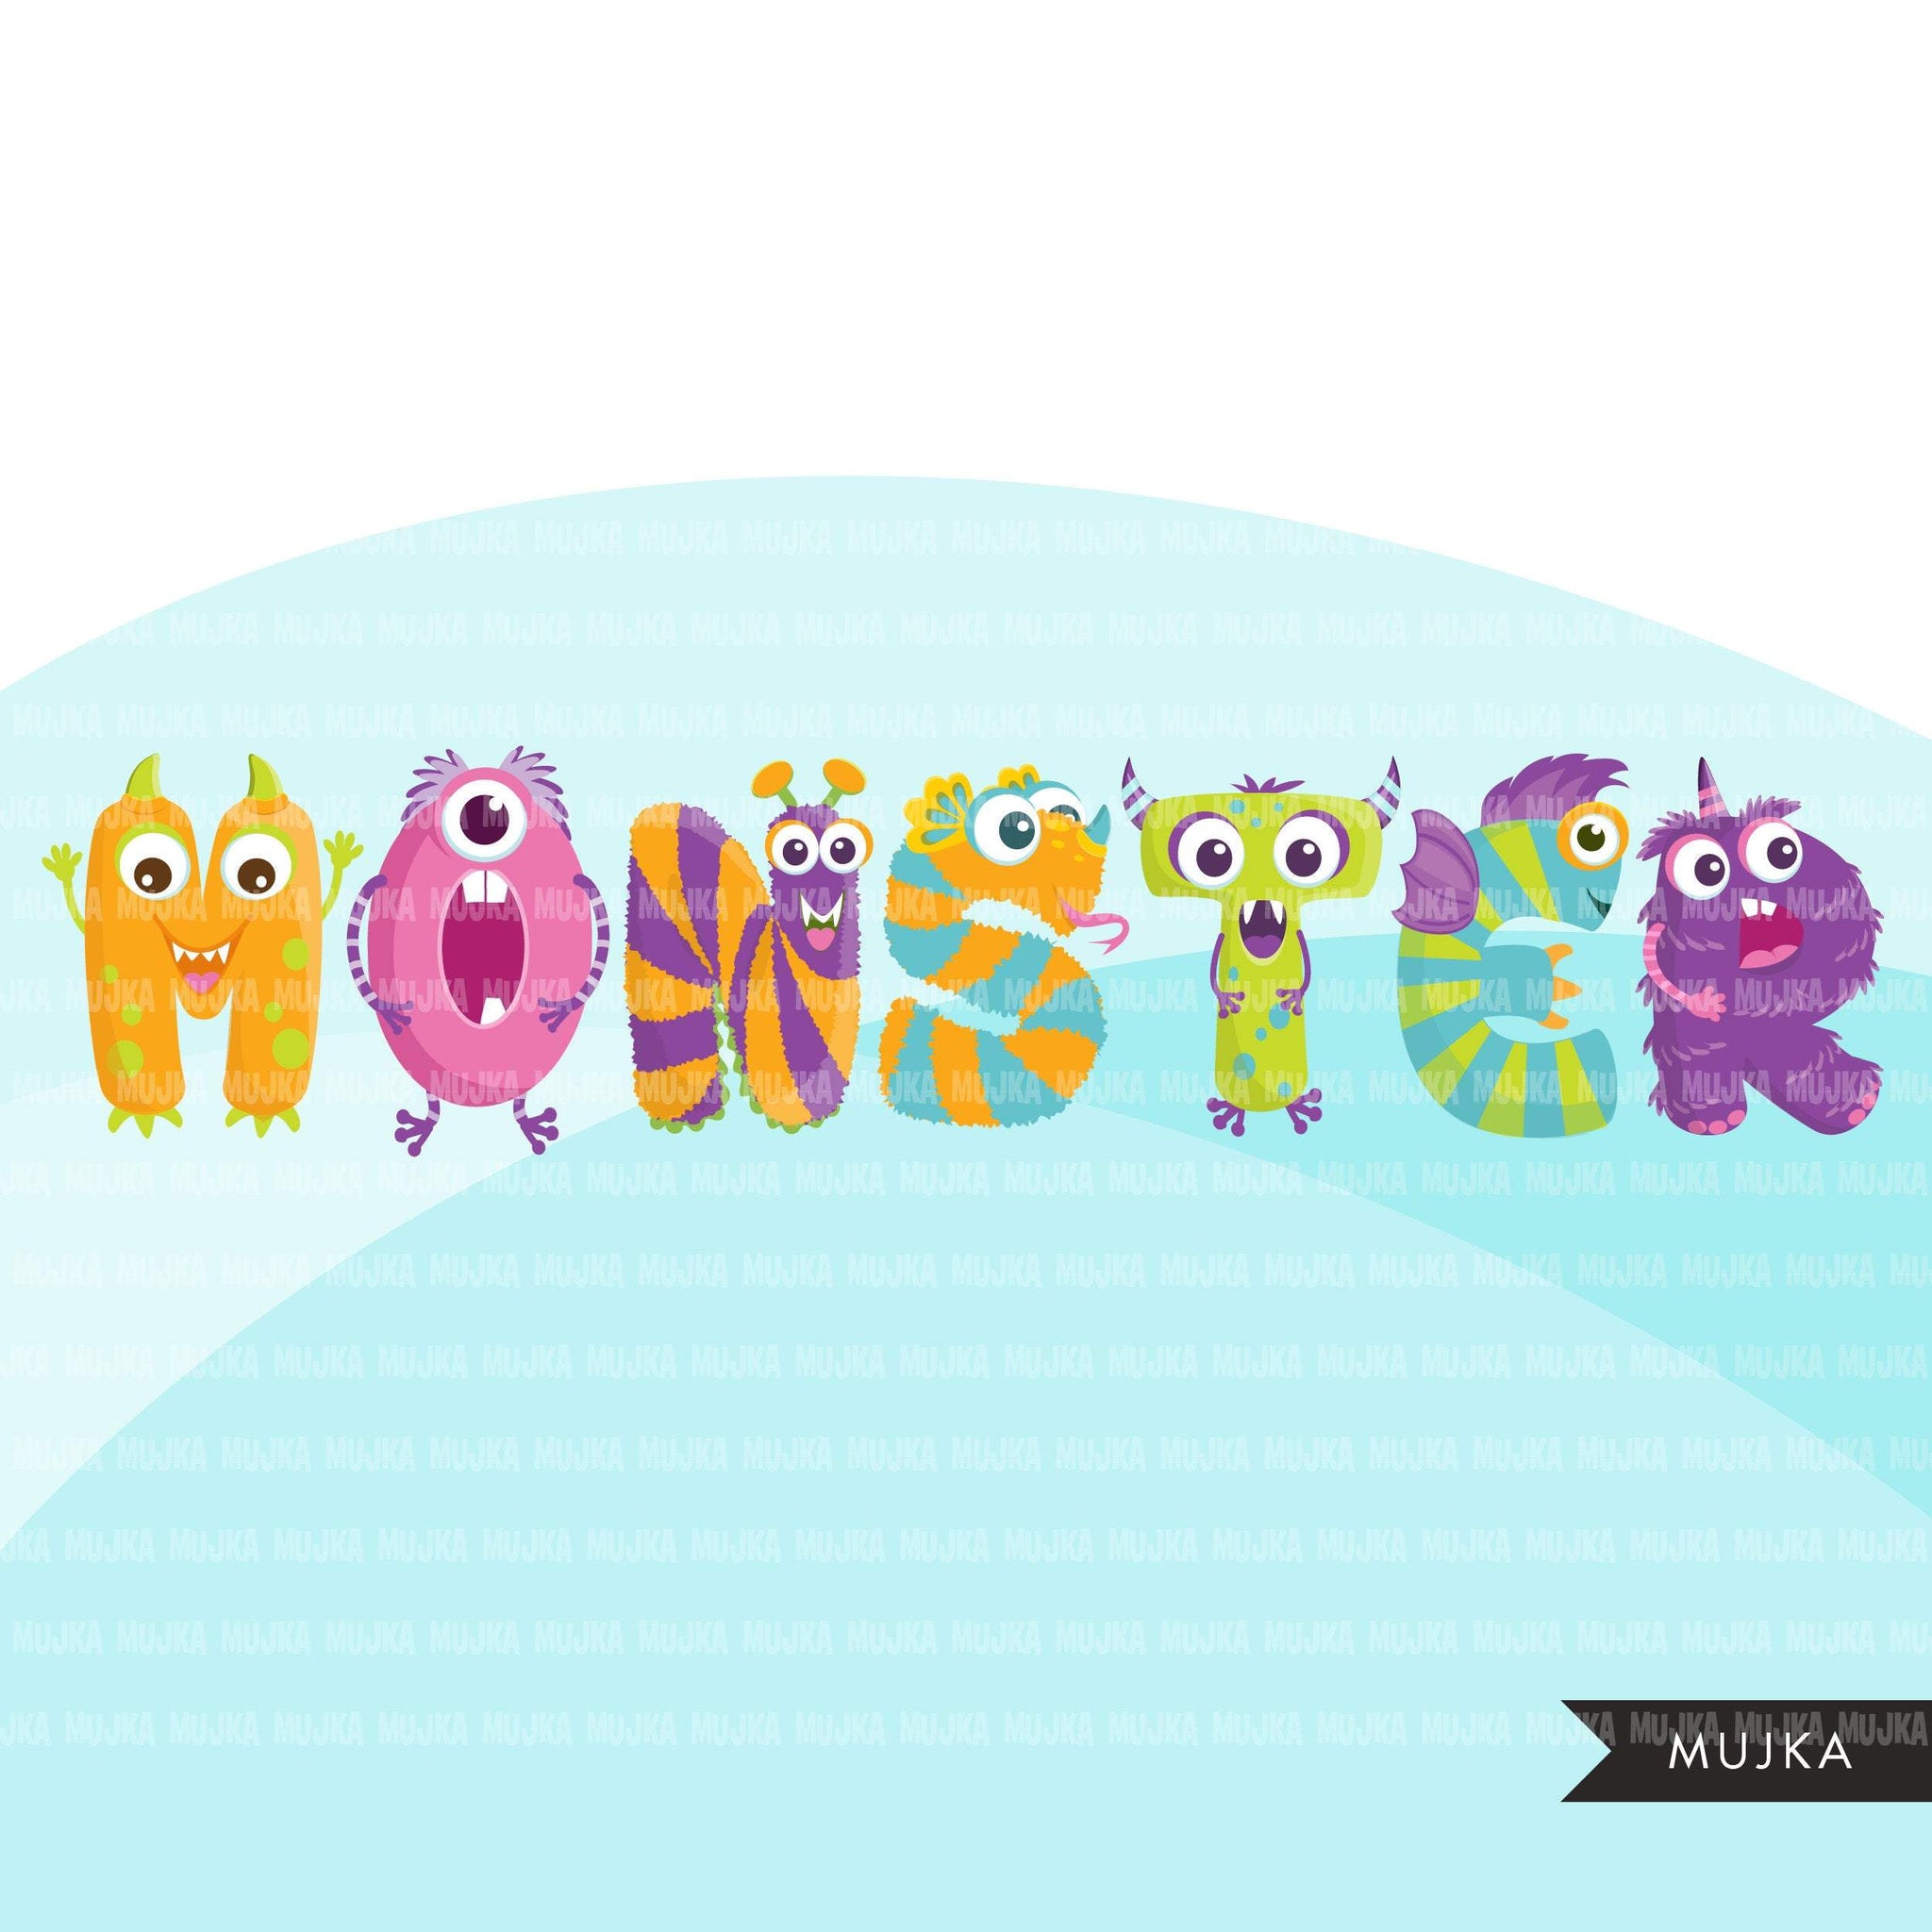 Colorful Monster Alphabet Stickers